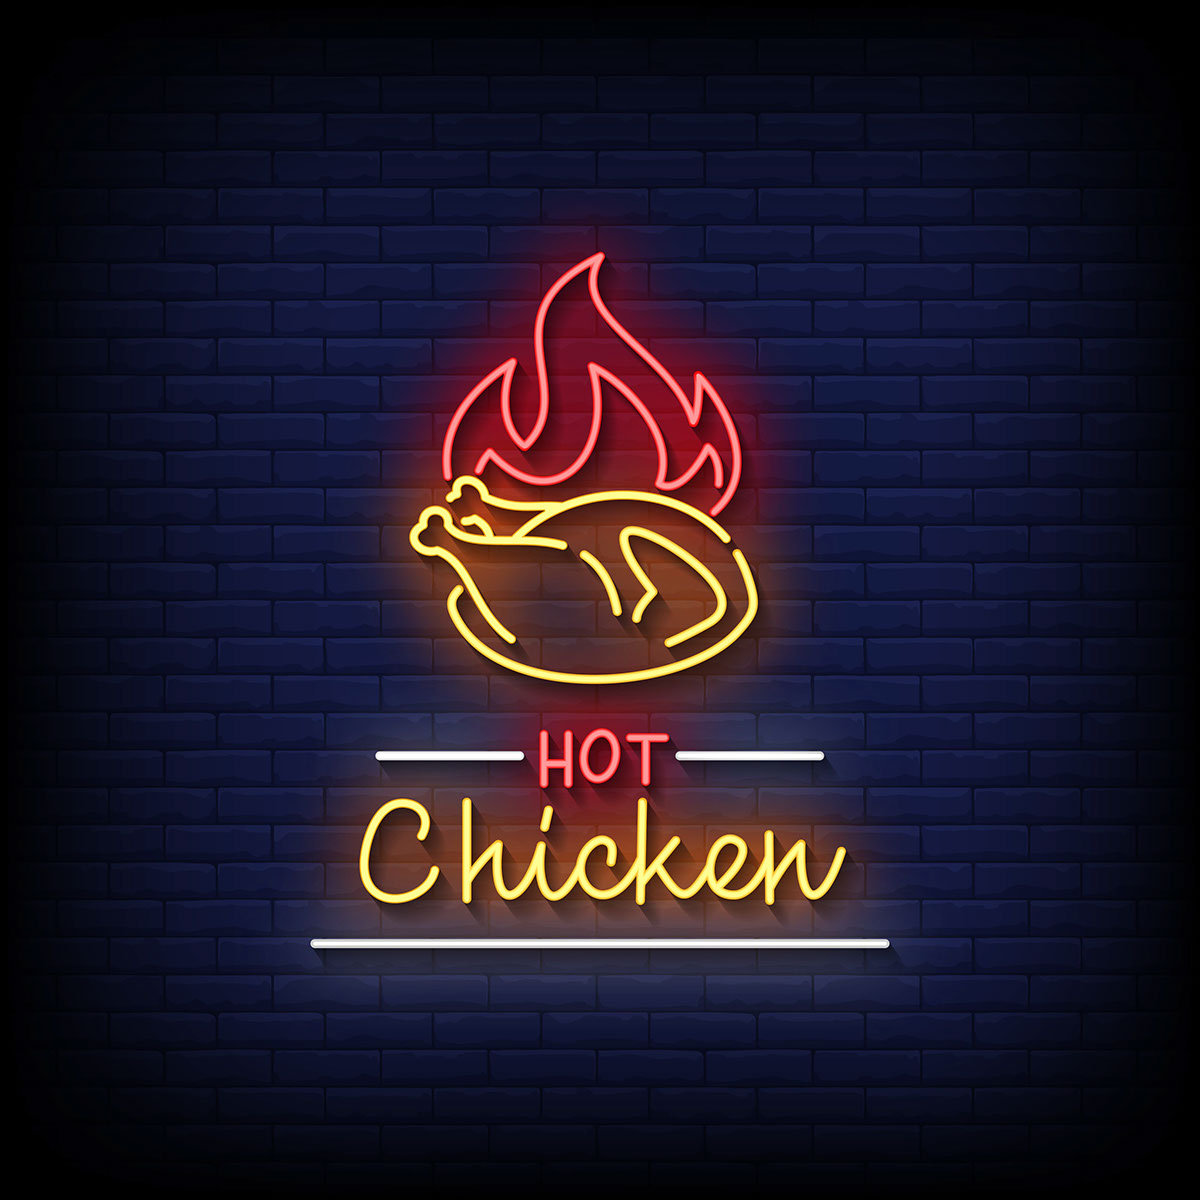 Hot Chicky rendition image